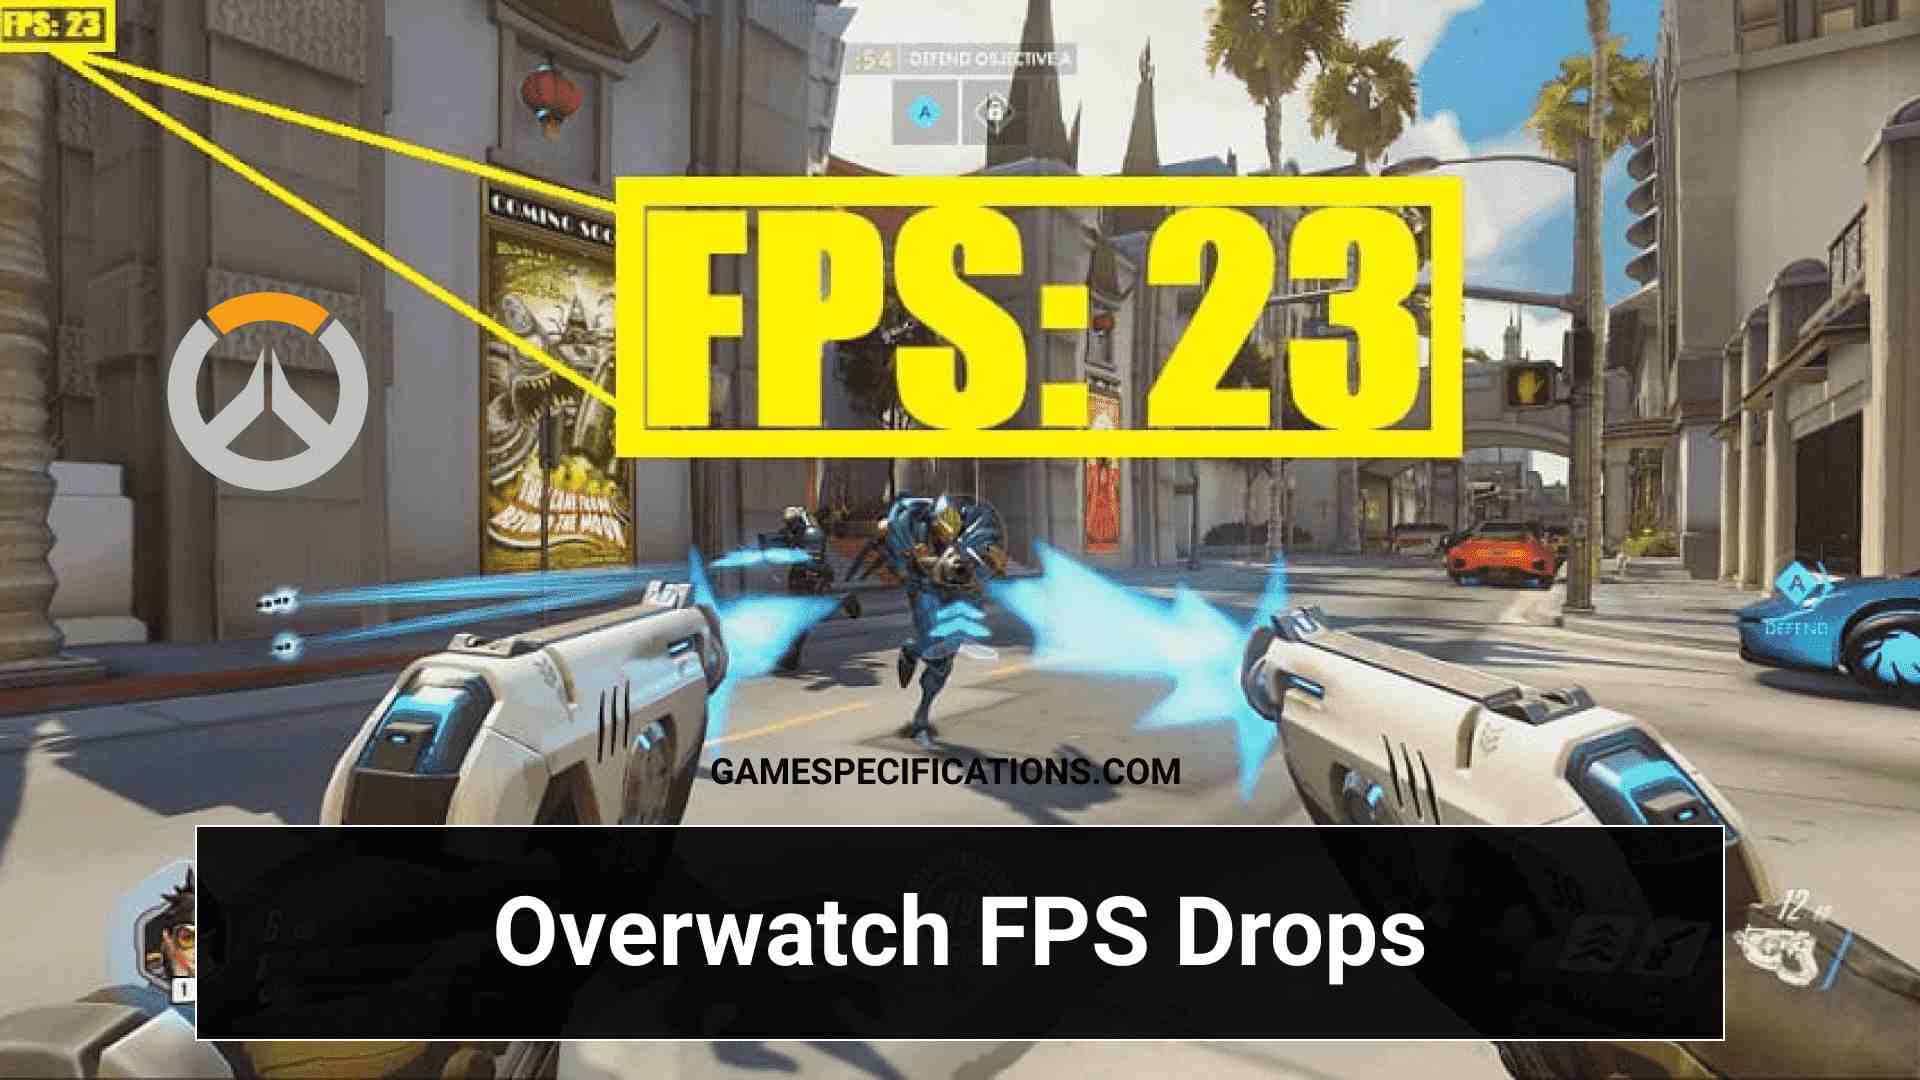 5 Easy Ways To Fix Overwatch Fps Drops On PC and Consoles